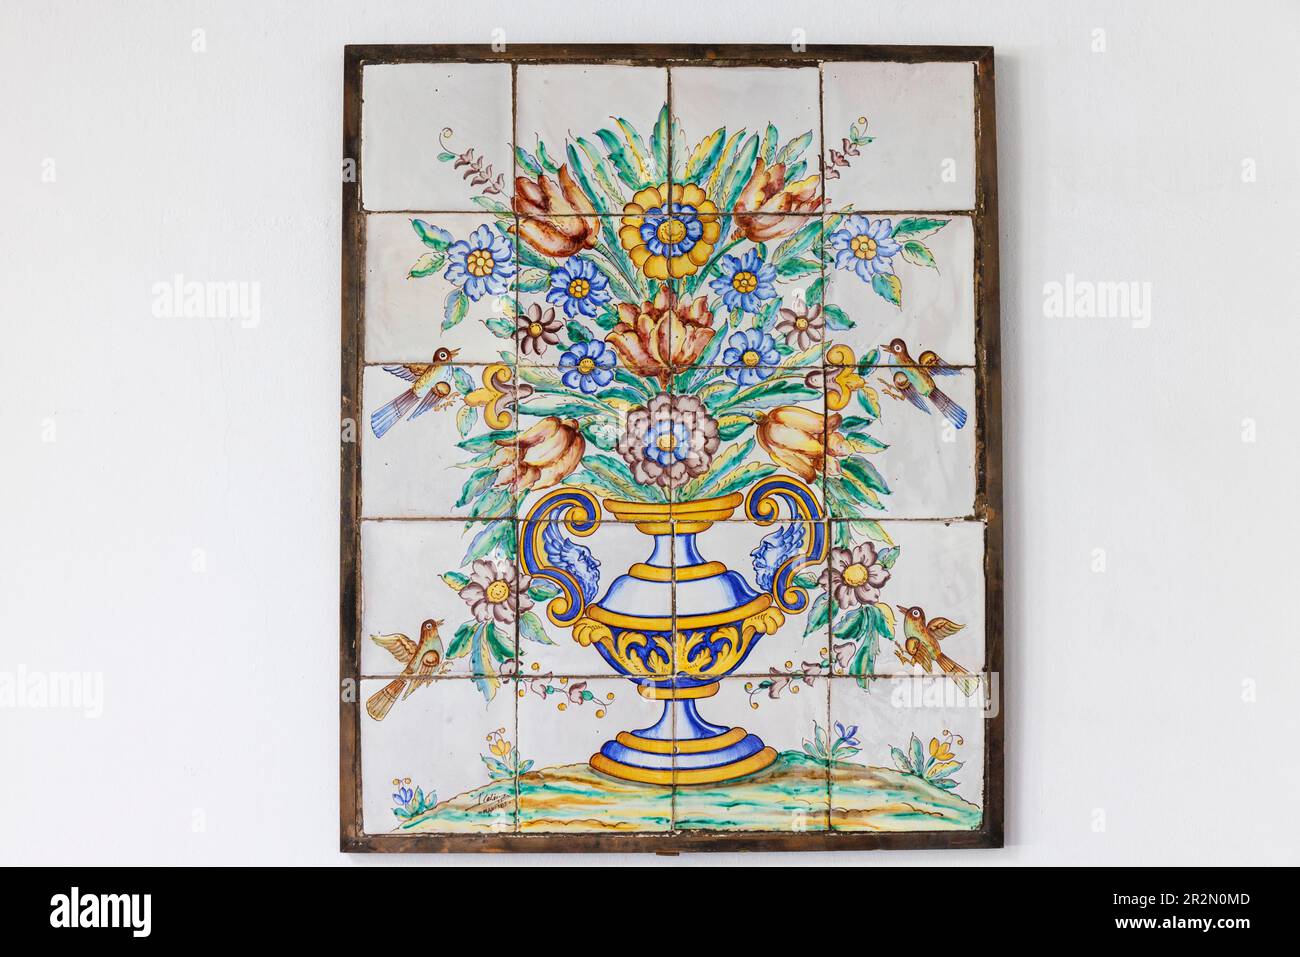 Ubeda, Jaen Province, Andalusia, southern Spain.  Azulejo in National Parador of a handled vase filled with flowers surrounded by birds in flight.  Ub Stock Photo